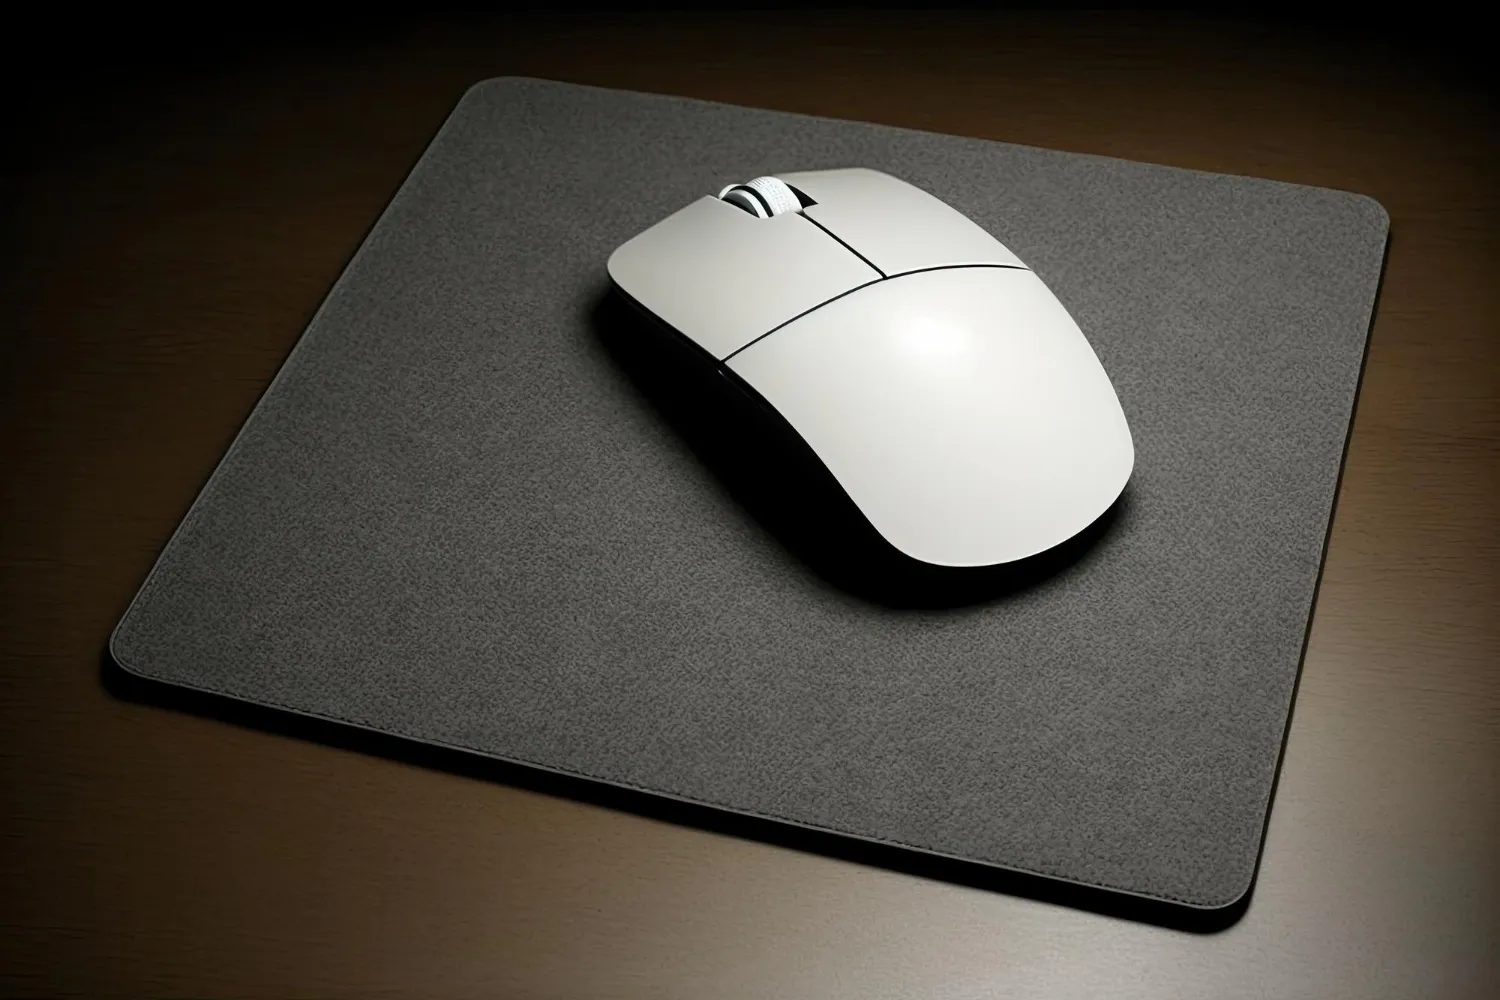 A white mouse is on a black mousepad with a black background.